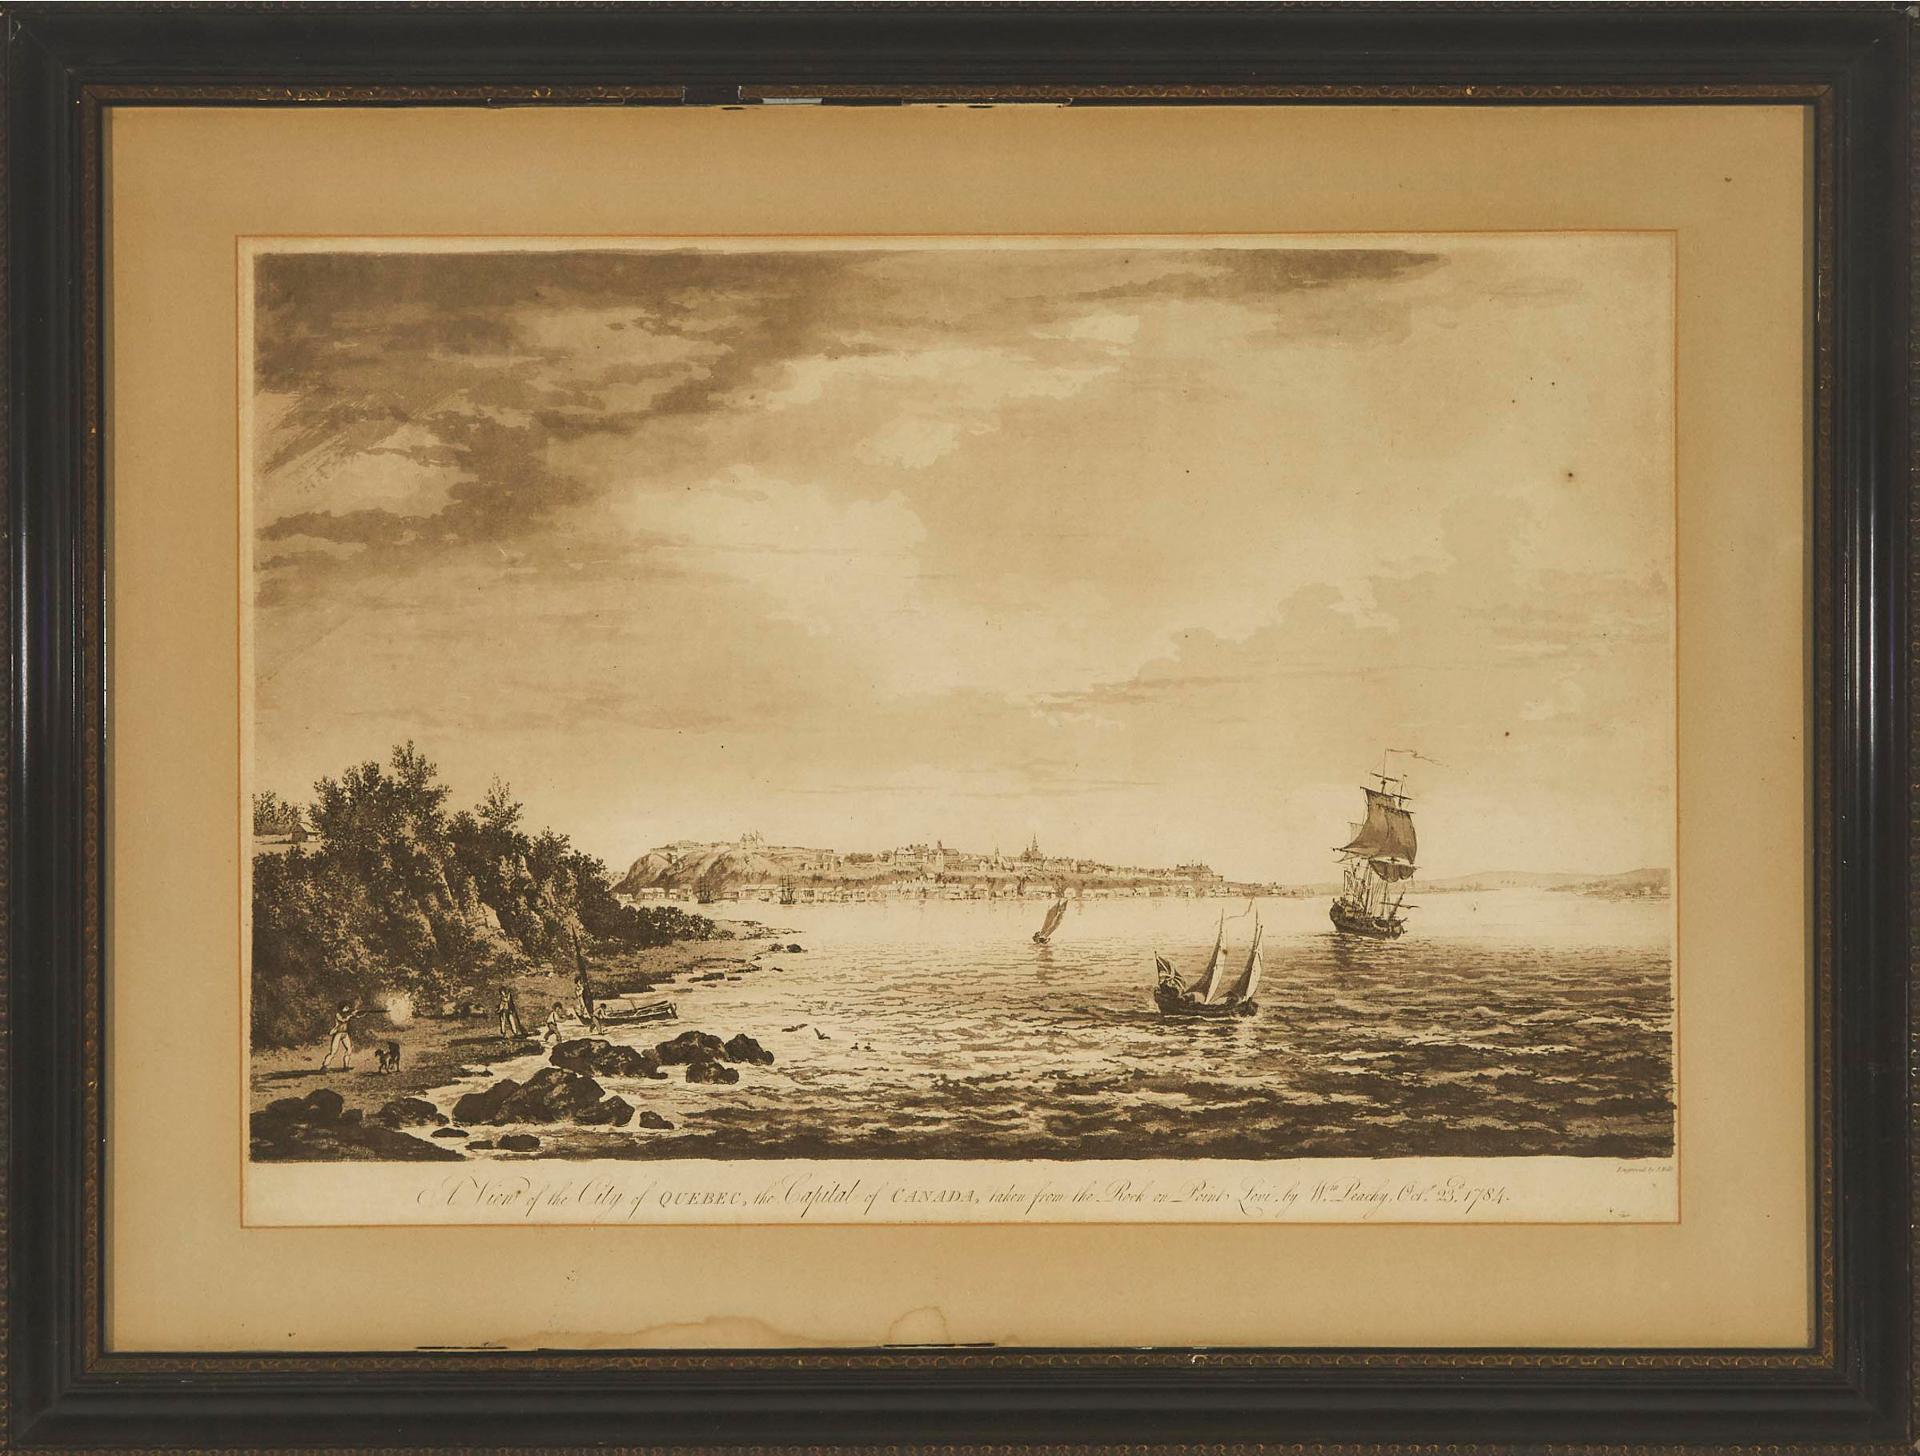 James Peachey (1781-1785) - A View Of The City Of Quebec, The Capital Of Canada, Taken From The Rock On Point Levi